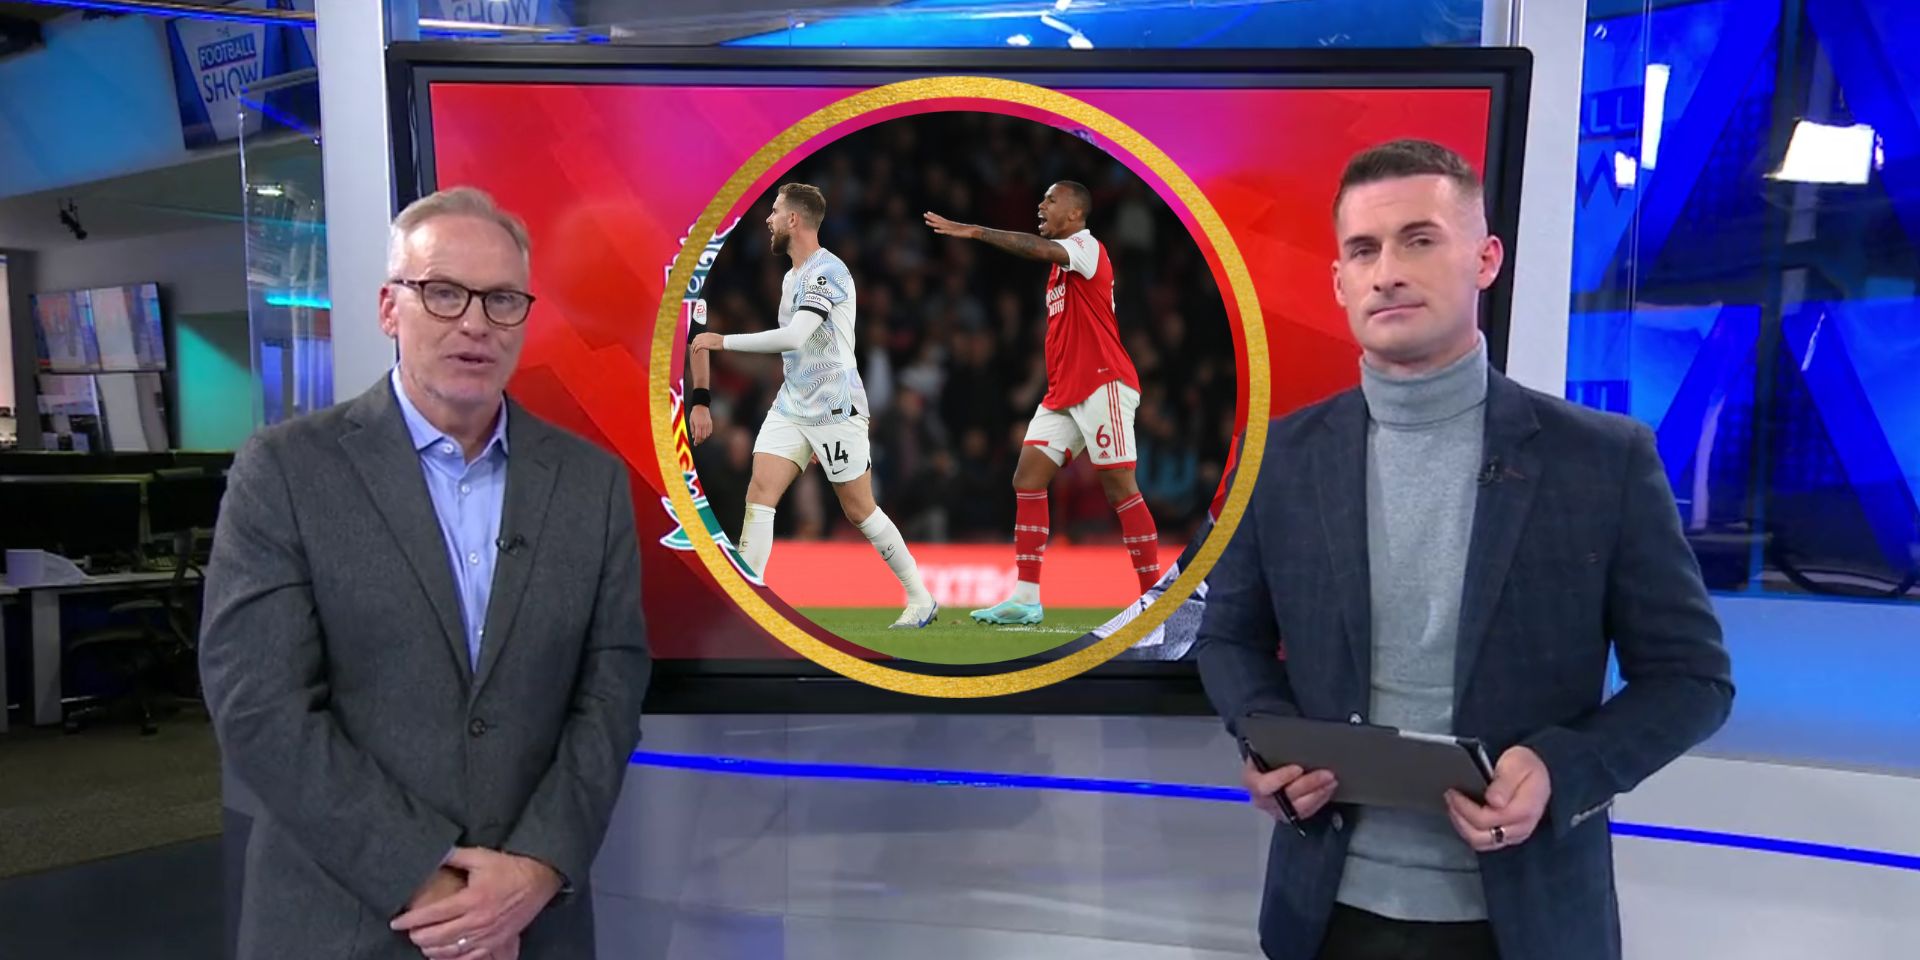 (Video) The FA has started ‘gathering information’ about the incident between Henderson and Gabriel